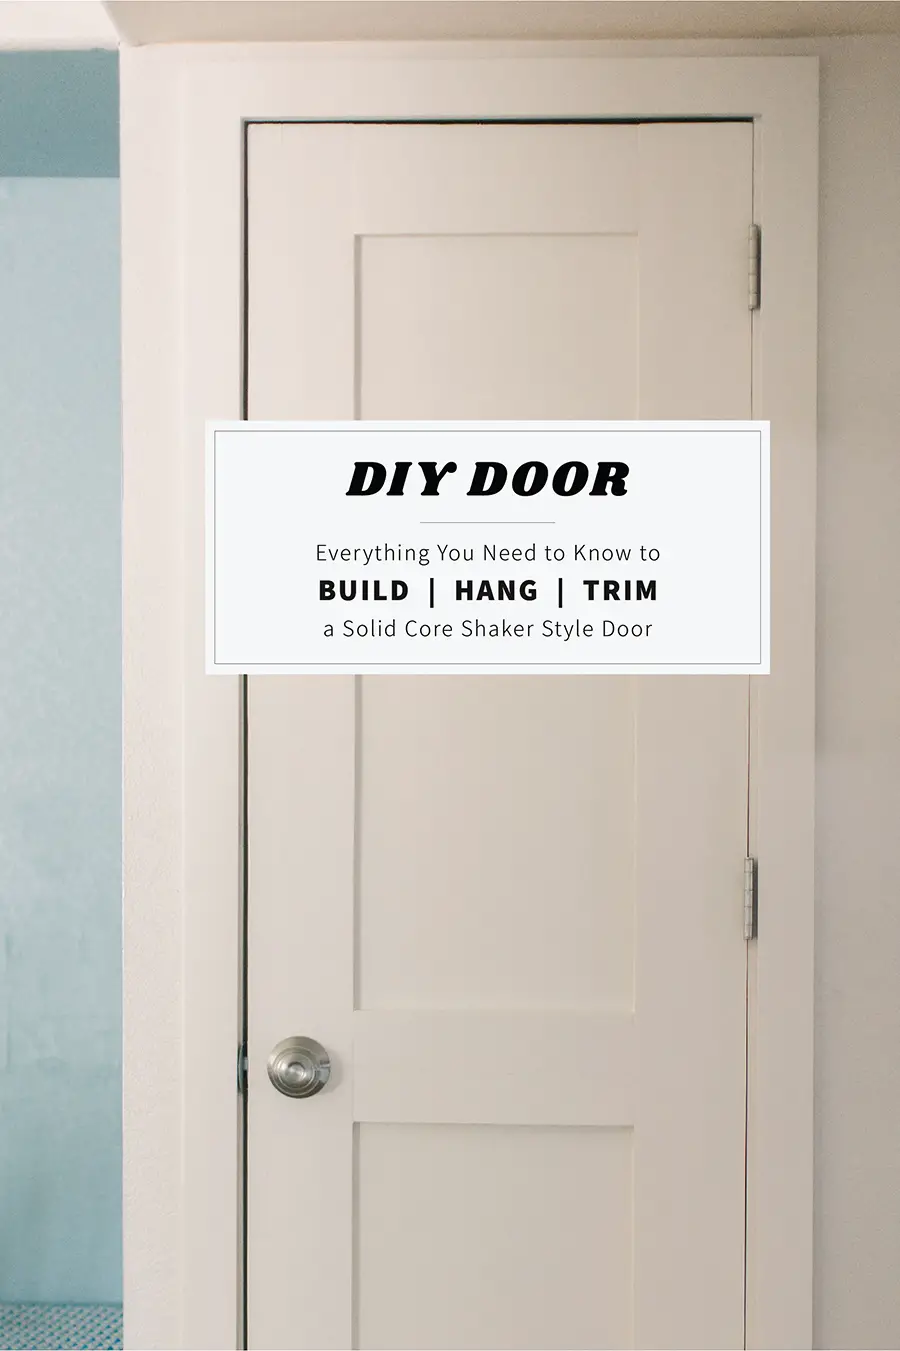 DIY Shaker Style Door: Everything You Need to Know to Build Hang and Trim